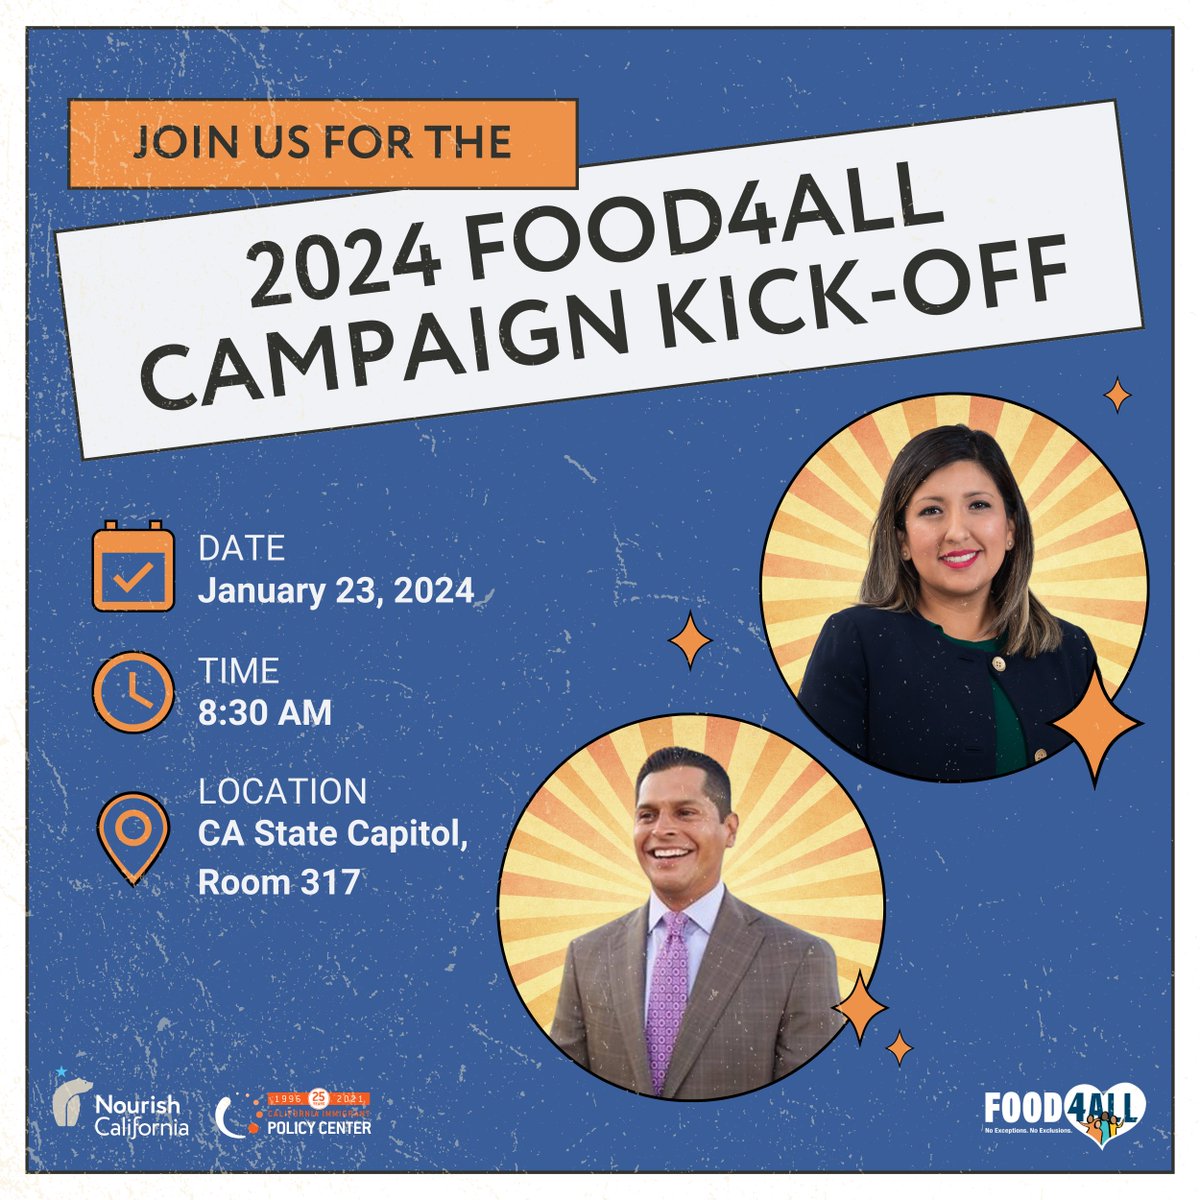 Today is the 2024 #Food4All campaign kick-off!! @Nourish_CA & @CALImmigrant will be joined by .@senator_hurtado and .@msantiagoad54, so make sure you tune in to our livestream on @CALImmigrant’s Facebook or @Nourish_CA’s Instagram at 8:30AM! #NoExceptionsNoExclusions #NoDelays